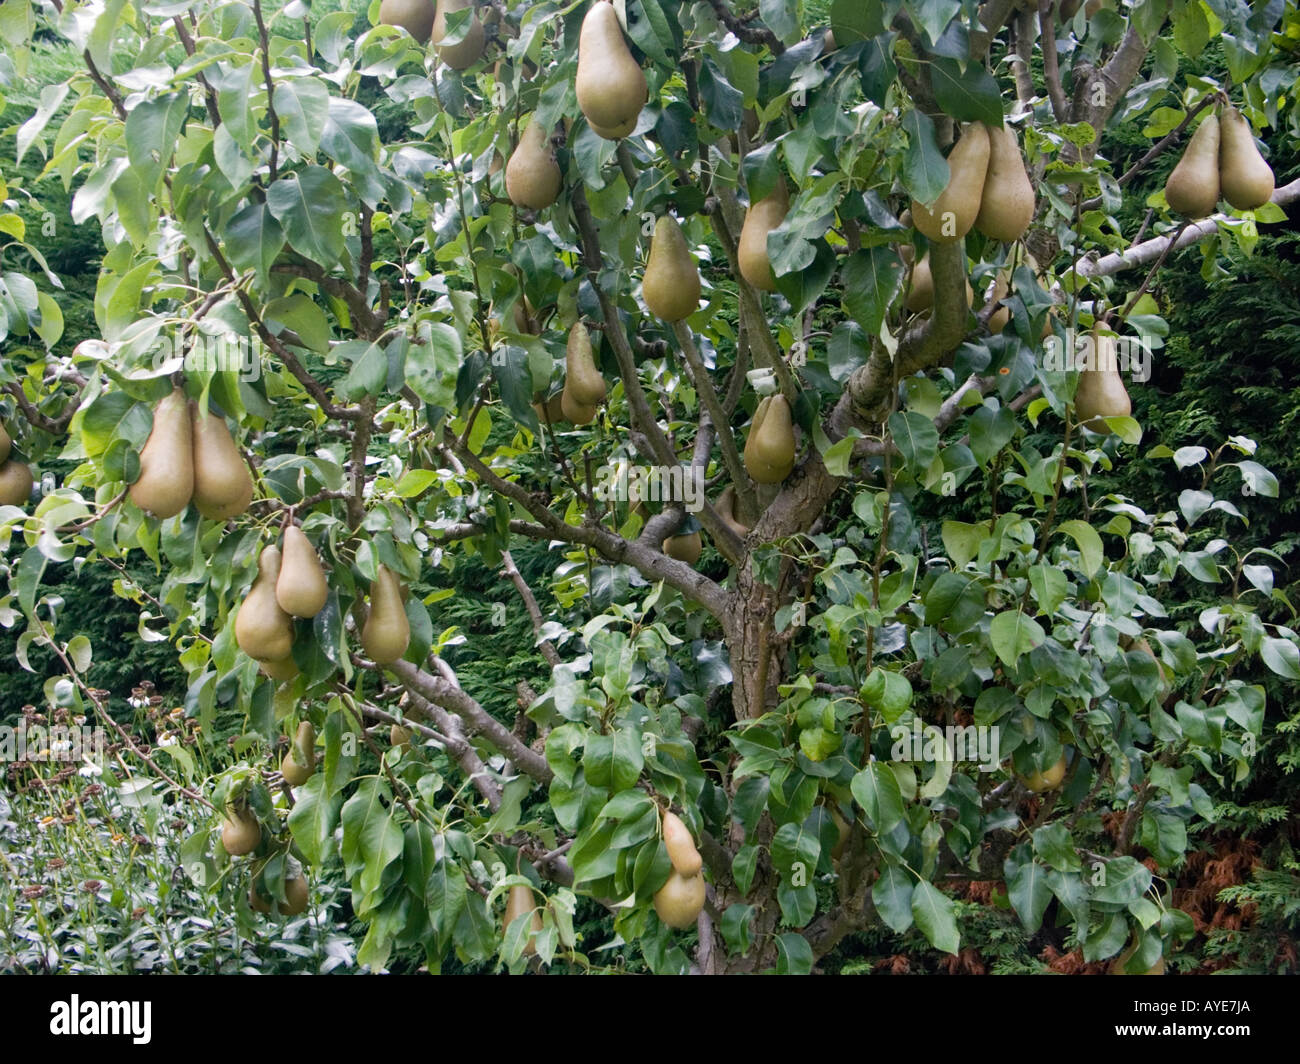 Large crop of Conference Pears on tree Stock Photo